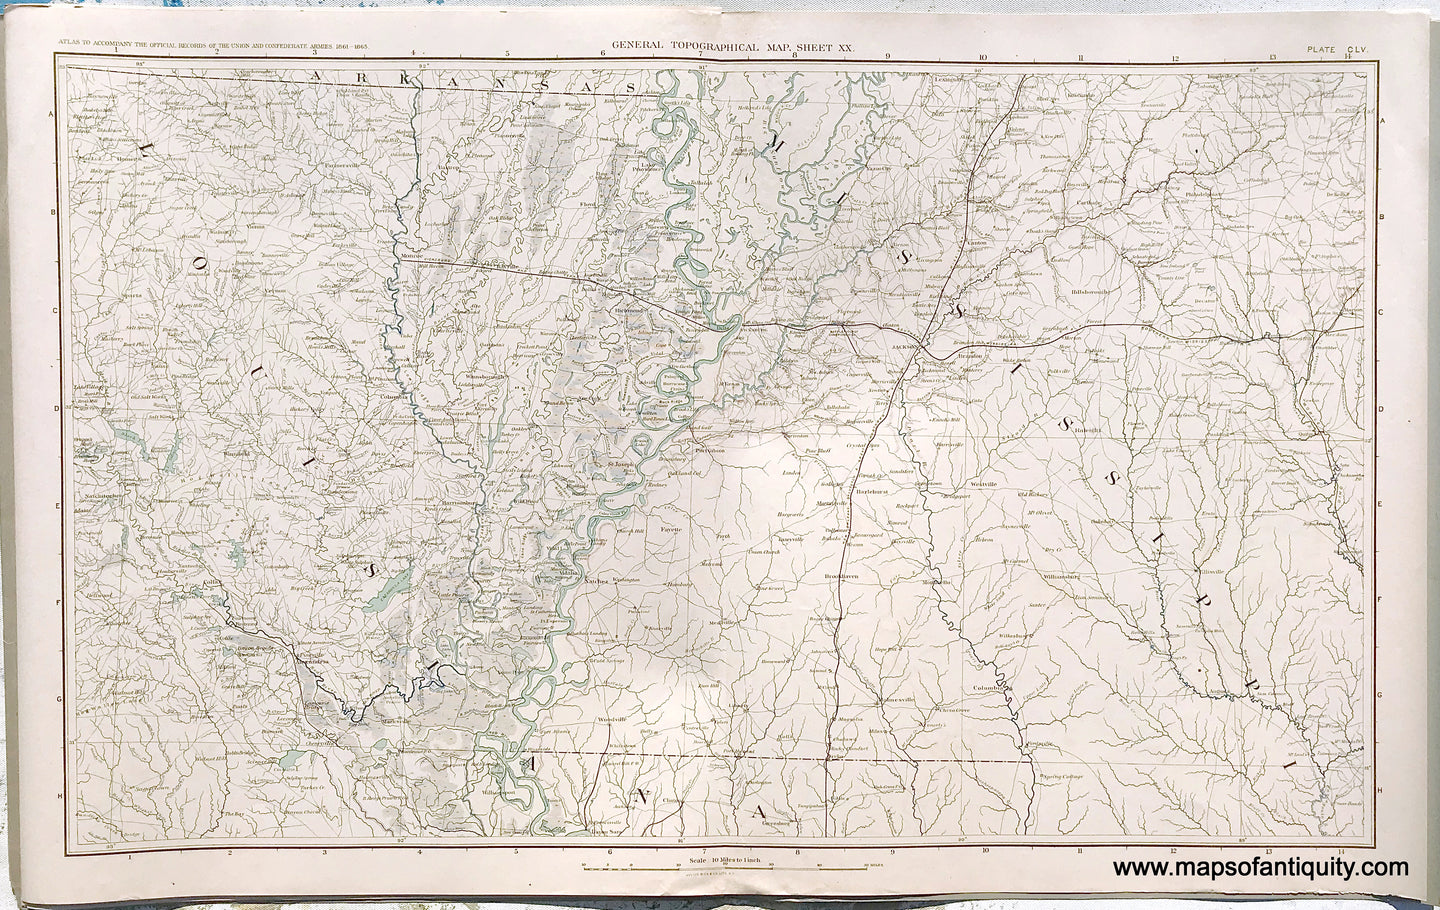 Antique-Lithograph-Print-Plate-155.-General-Topographical-Map.-Sheet-XX.-Sections-of-Louisiana-Arkansas-and-Mississippi.-1894-US-War-Dept.-Civil-War-Civil-War-1800s-19th-century-Maps-of-Antiquity